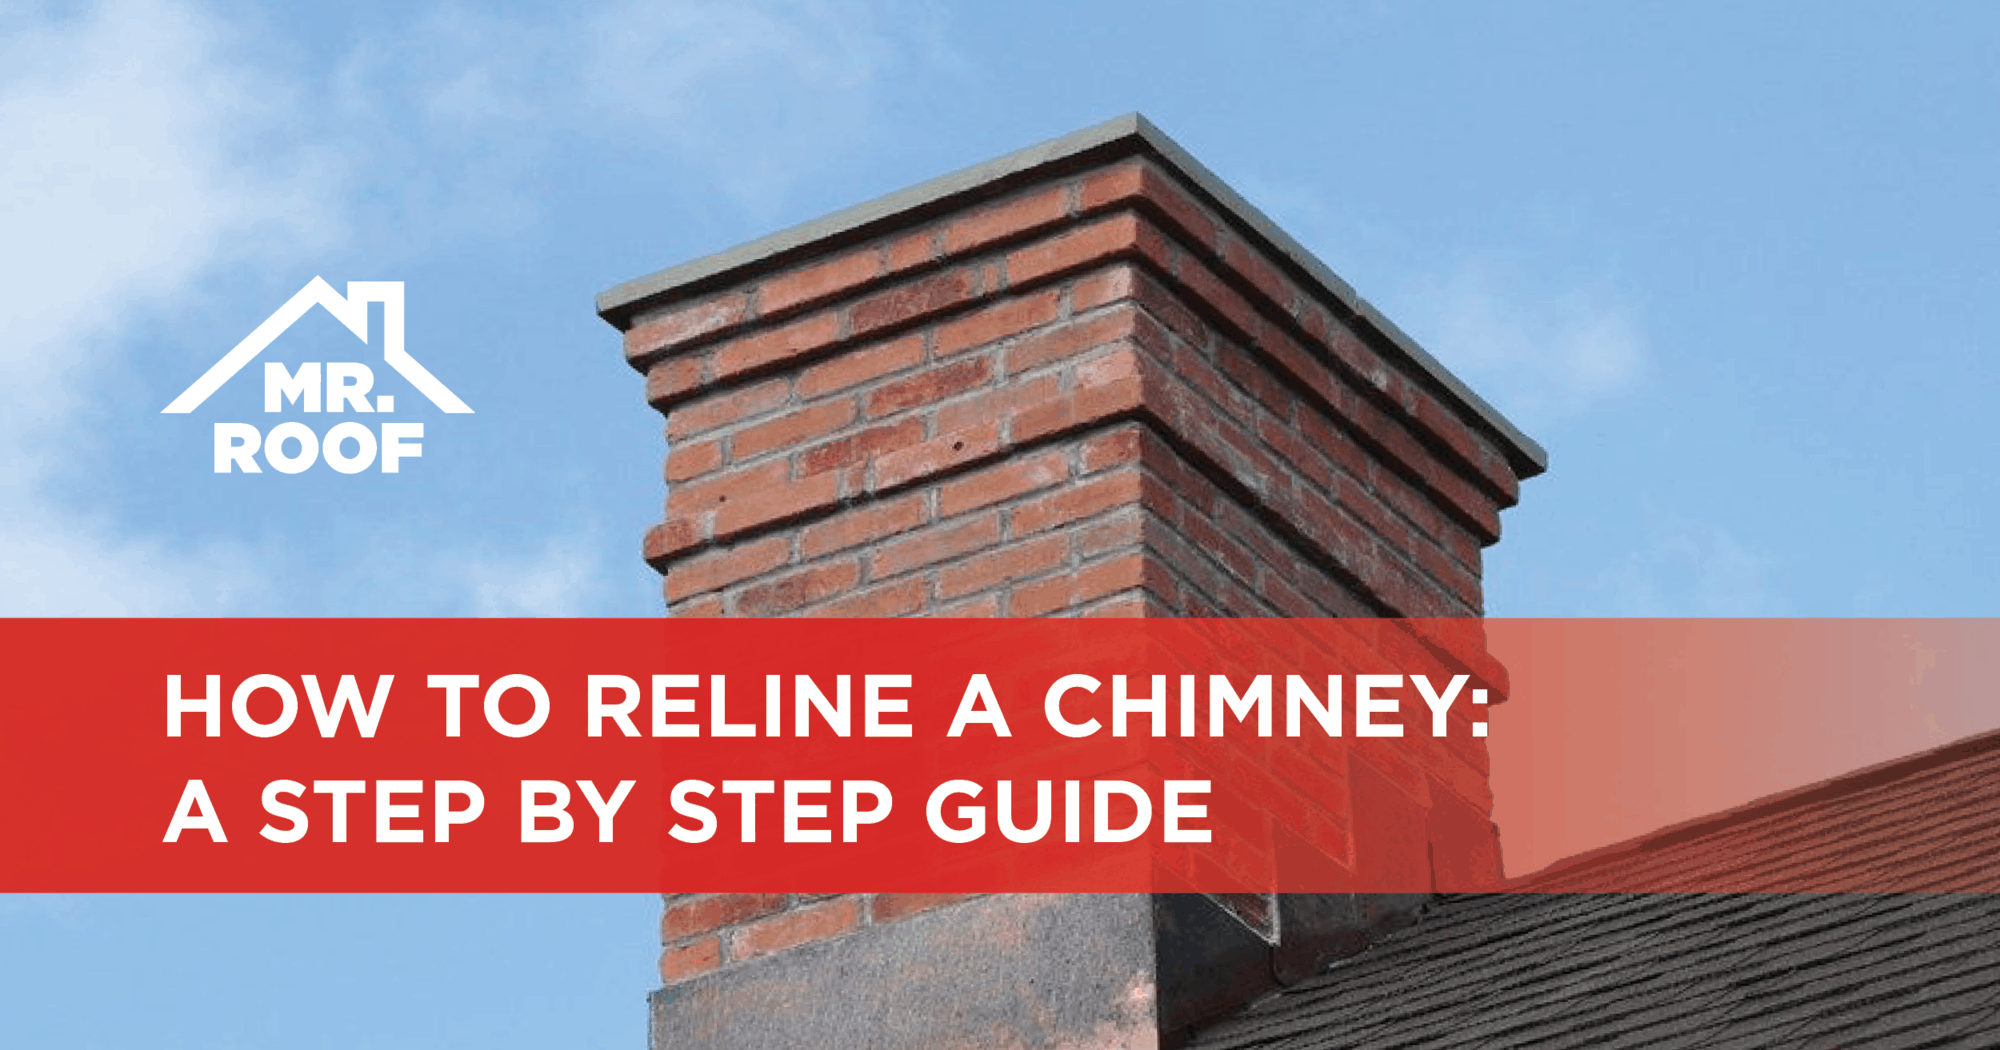 How to Reline a Chimney: A Step by Step Guide